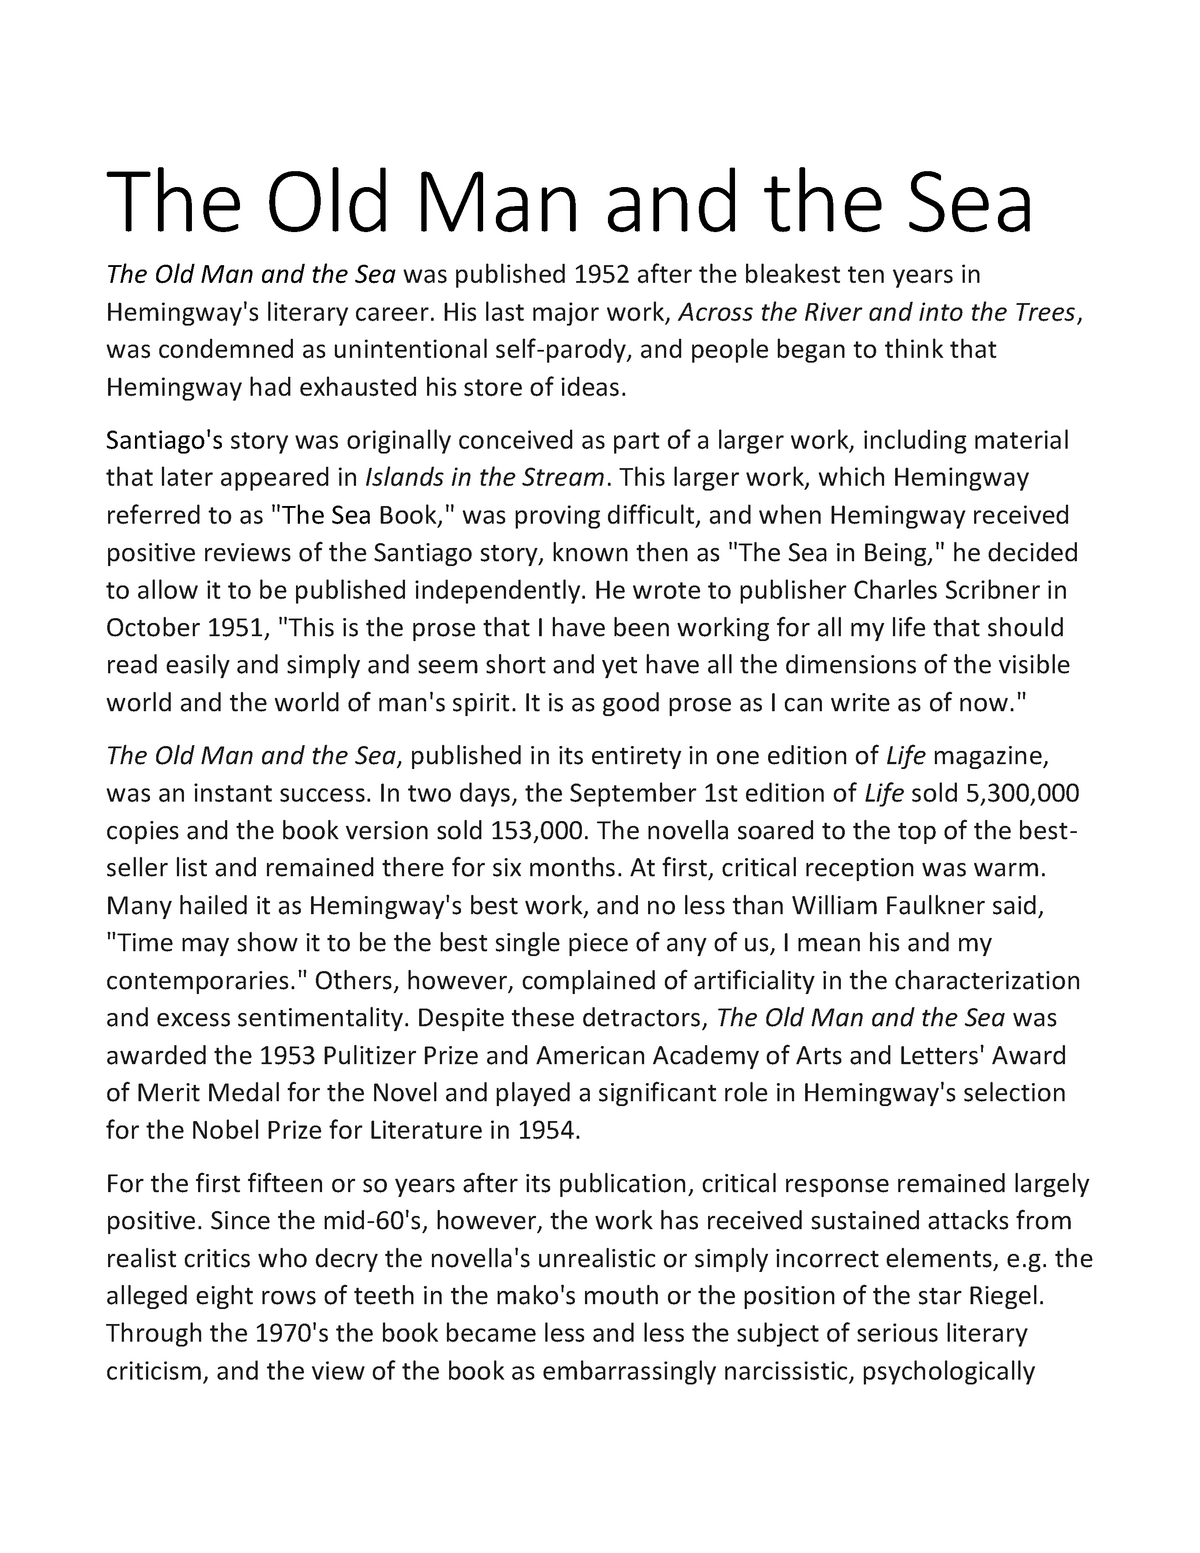 essay the old man and the sea